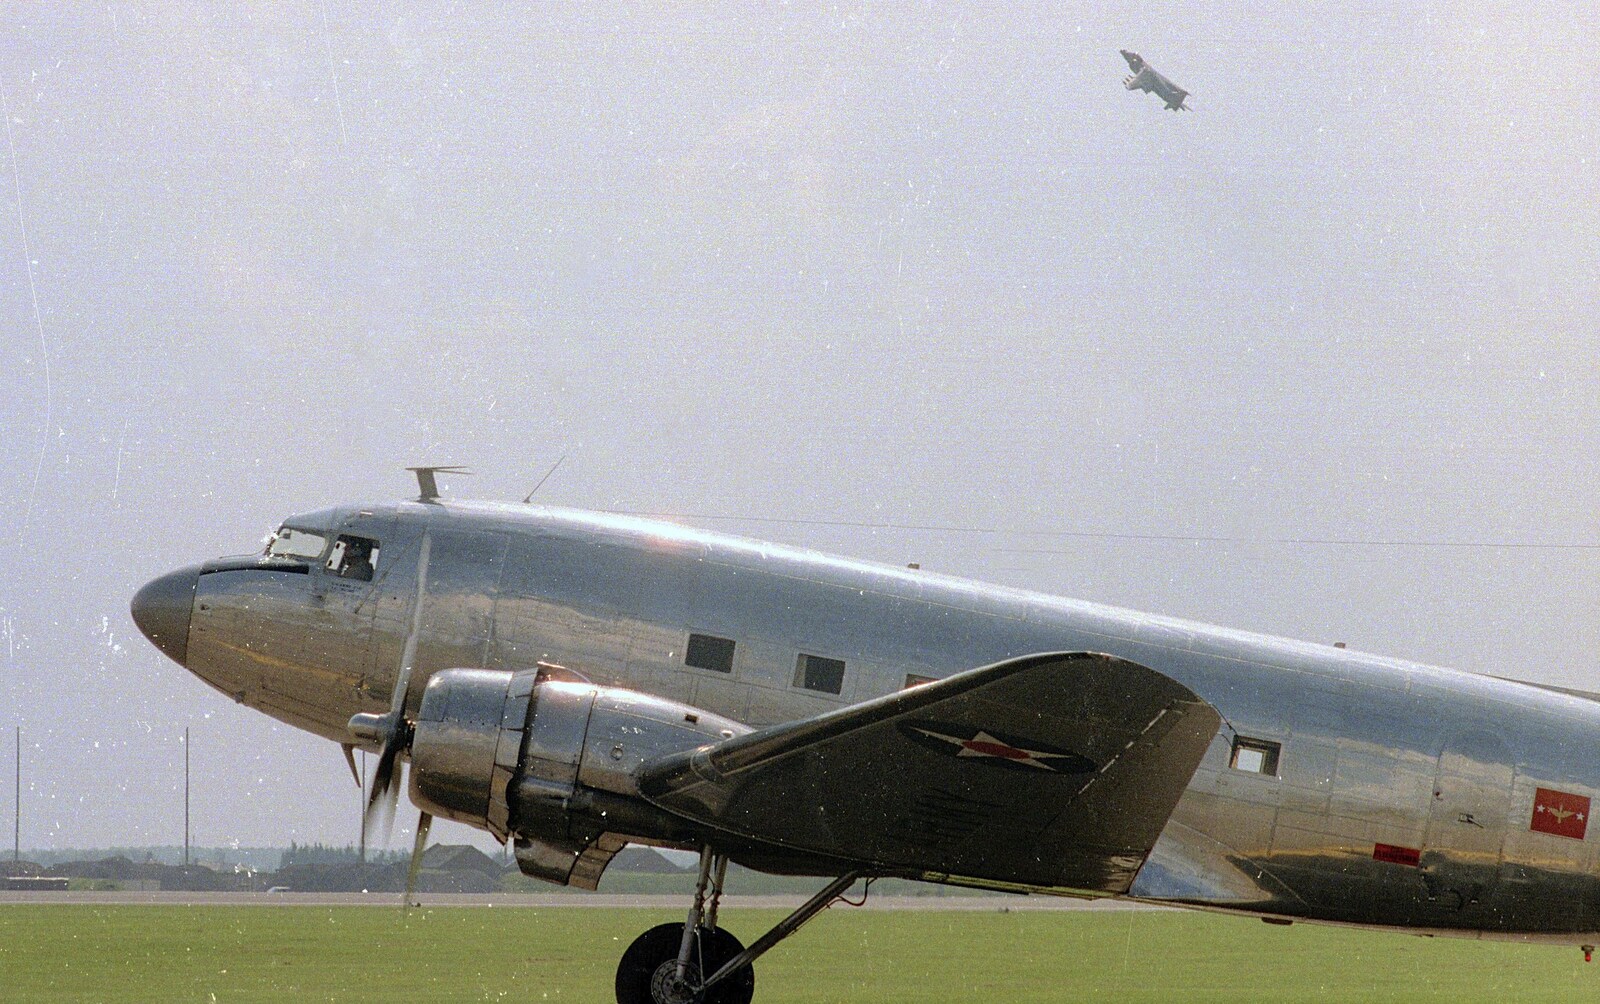 A nice profile of a DC-3 from The Mildenhall Air Fete, Mildenhall, Suffolk - 29th May 1994